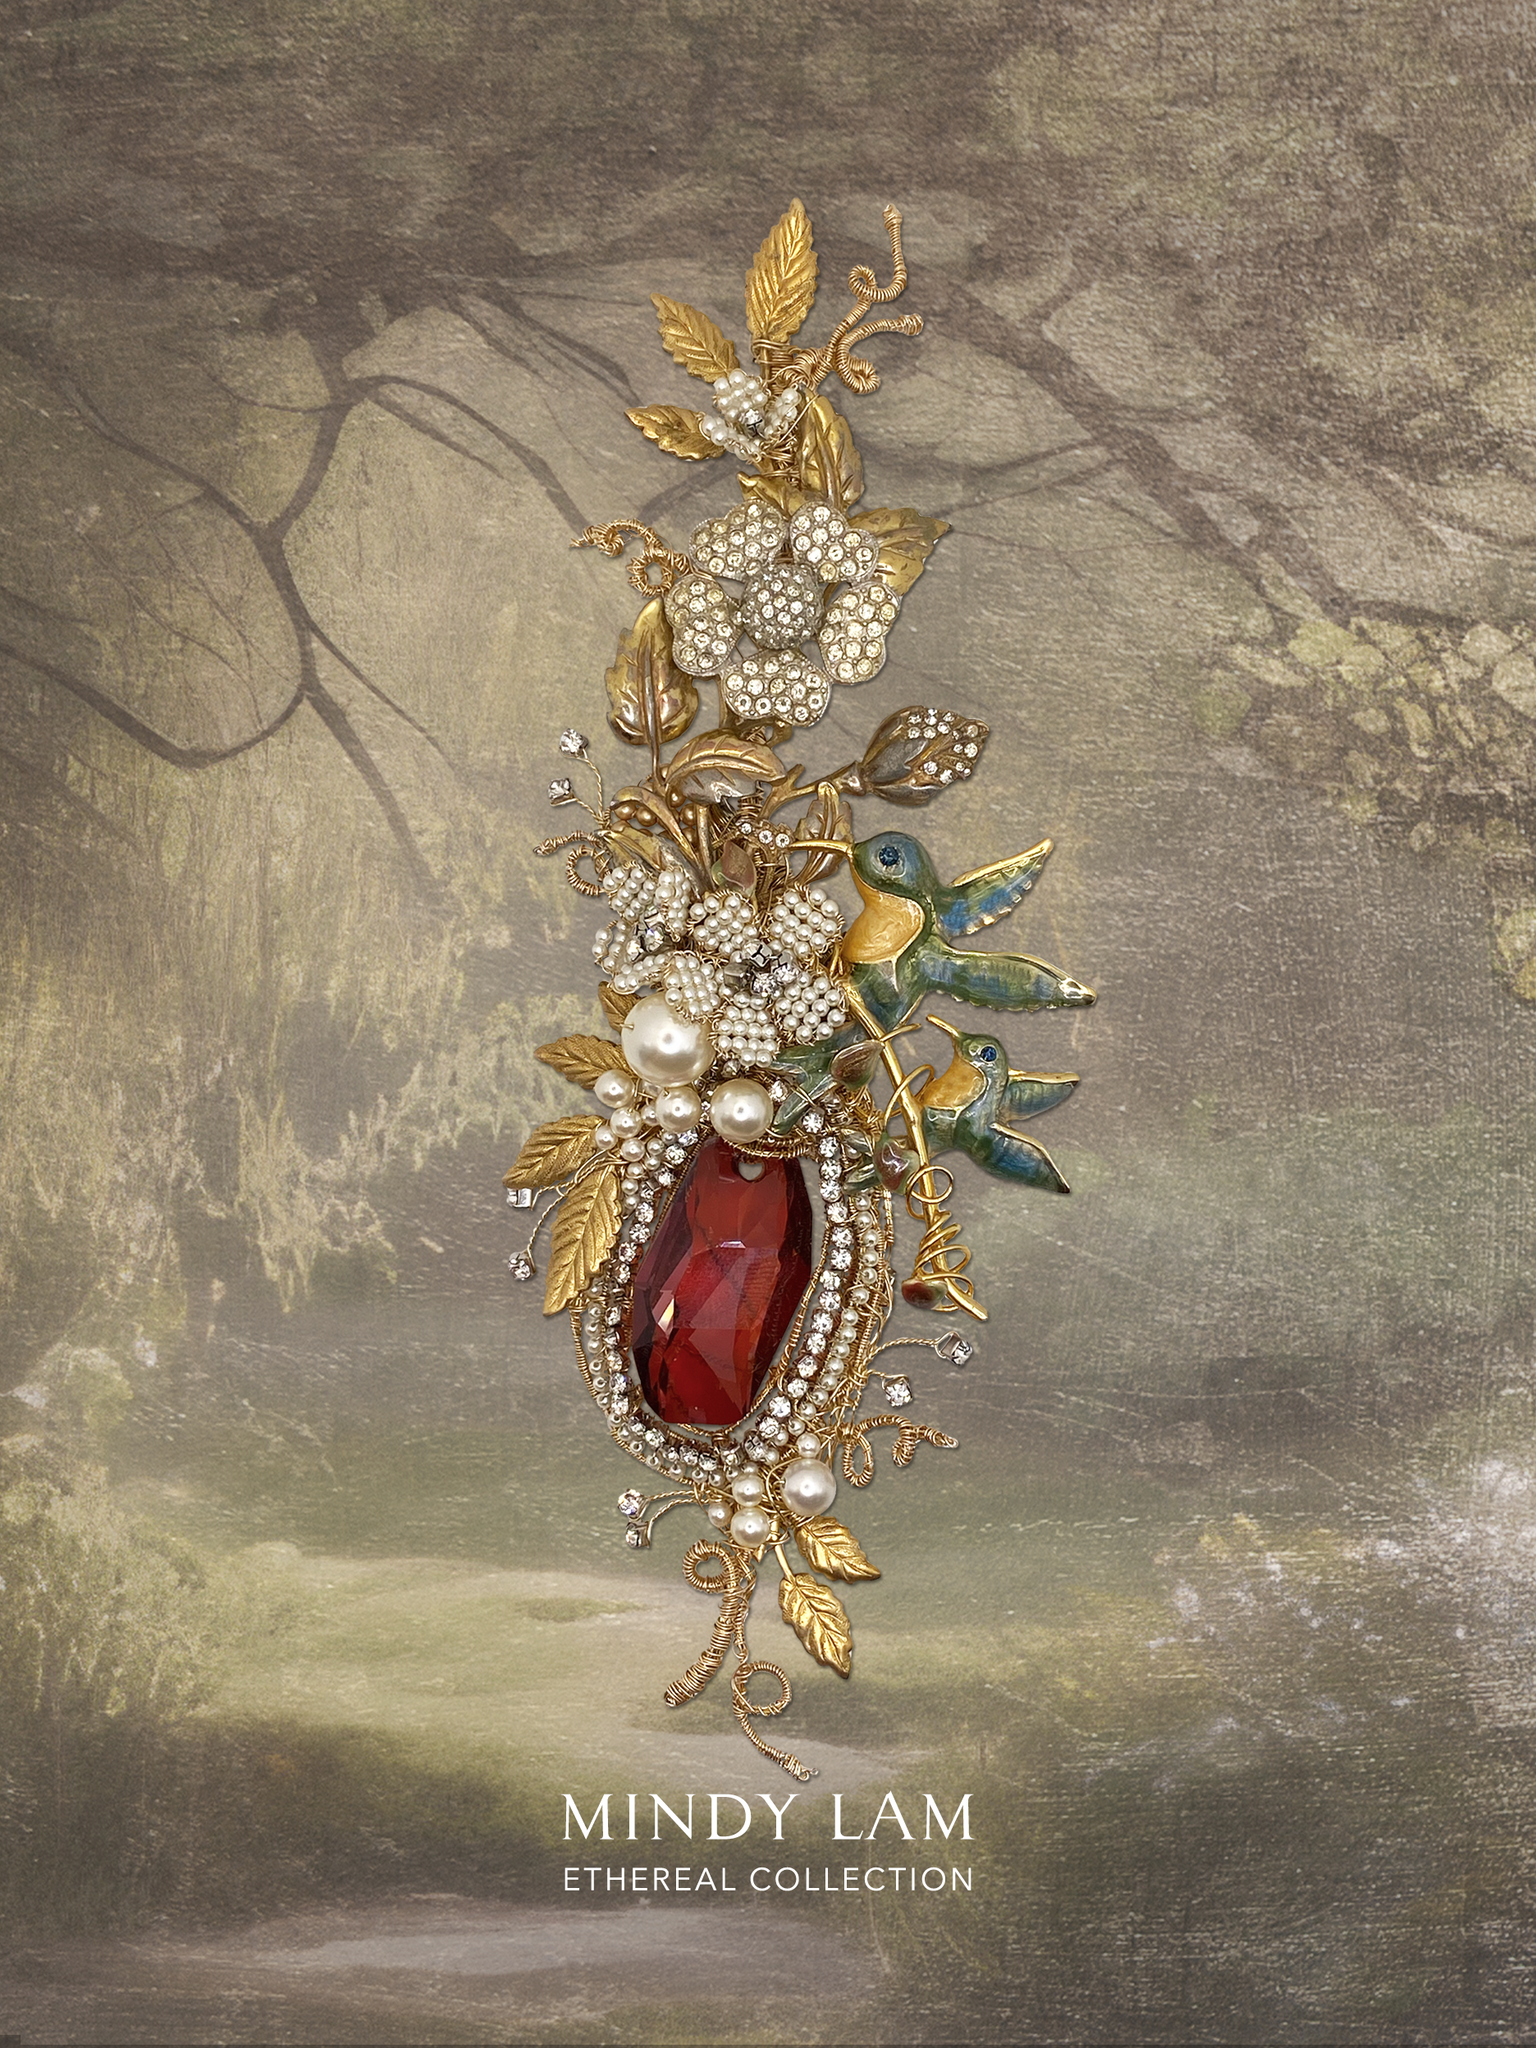 Ethereal Collection Lapel Pin - Secret Duets of the Garden